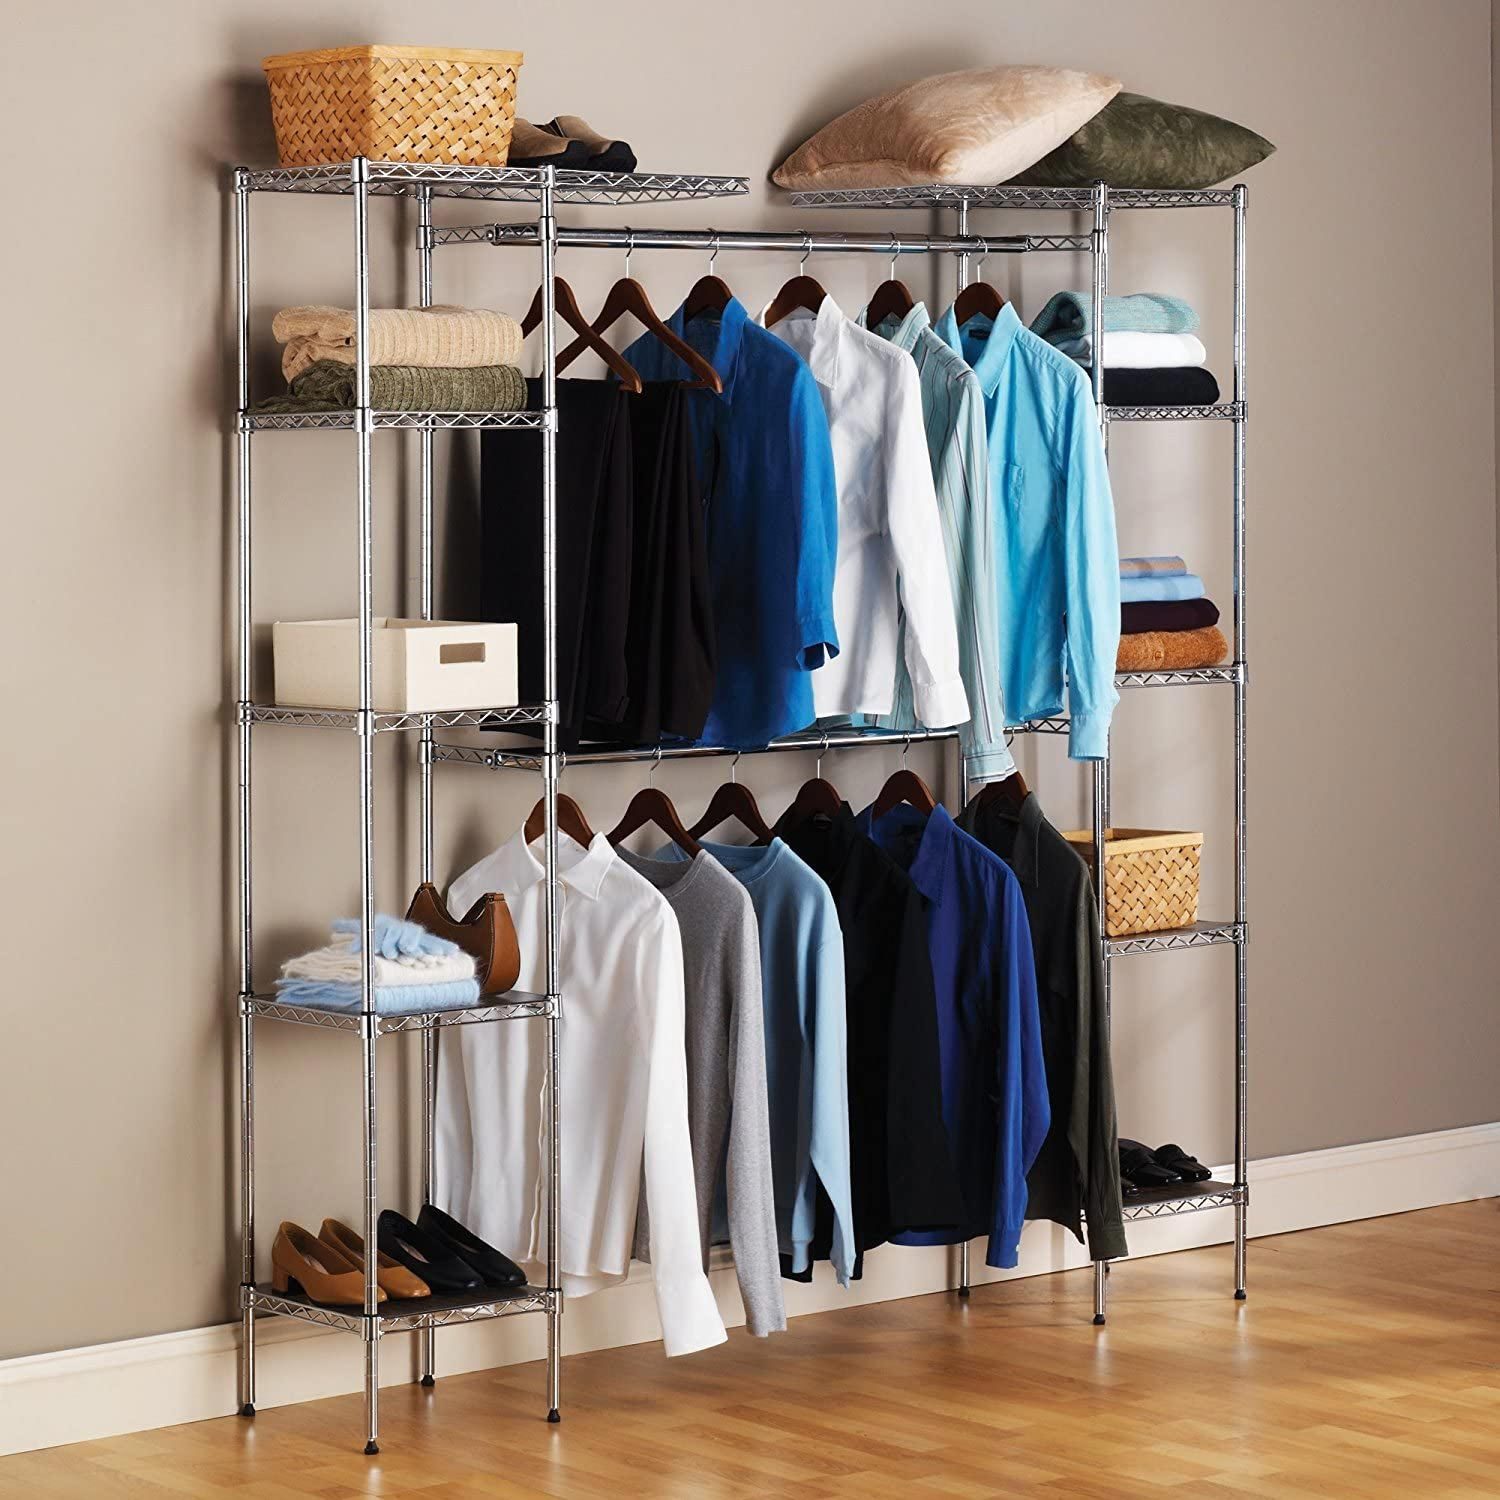 Elfa Classic 4' White Reach-In Clothes Closet Review